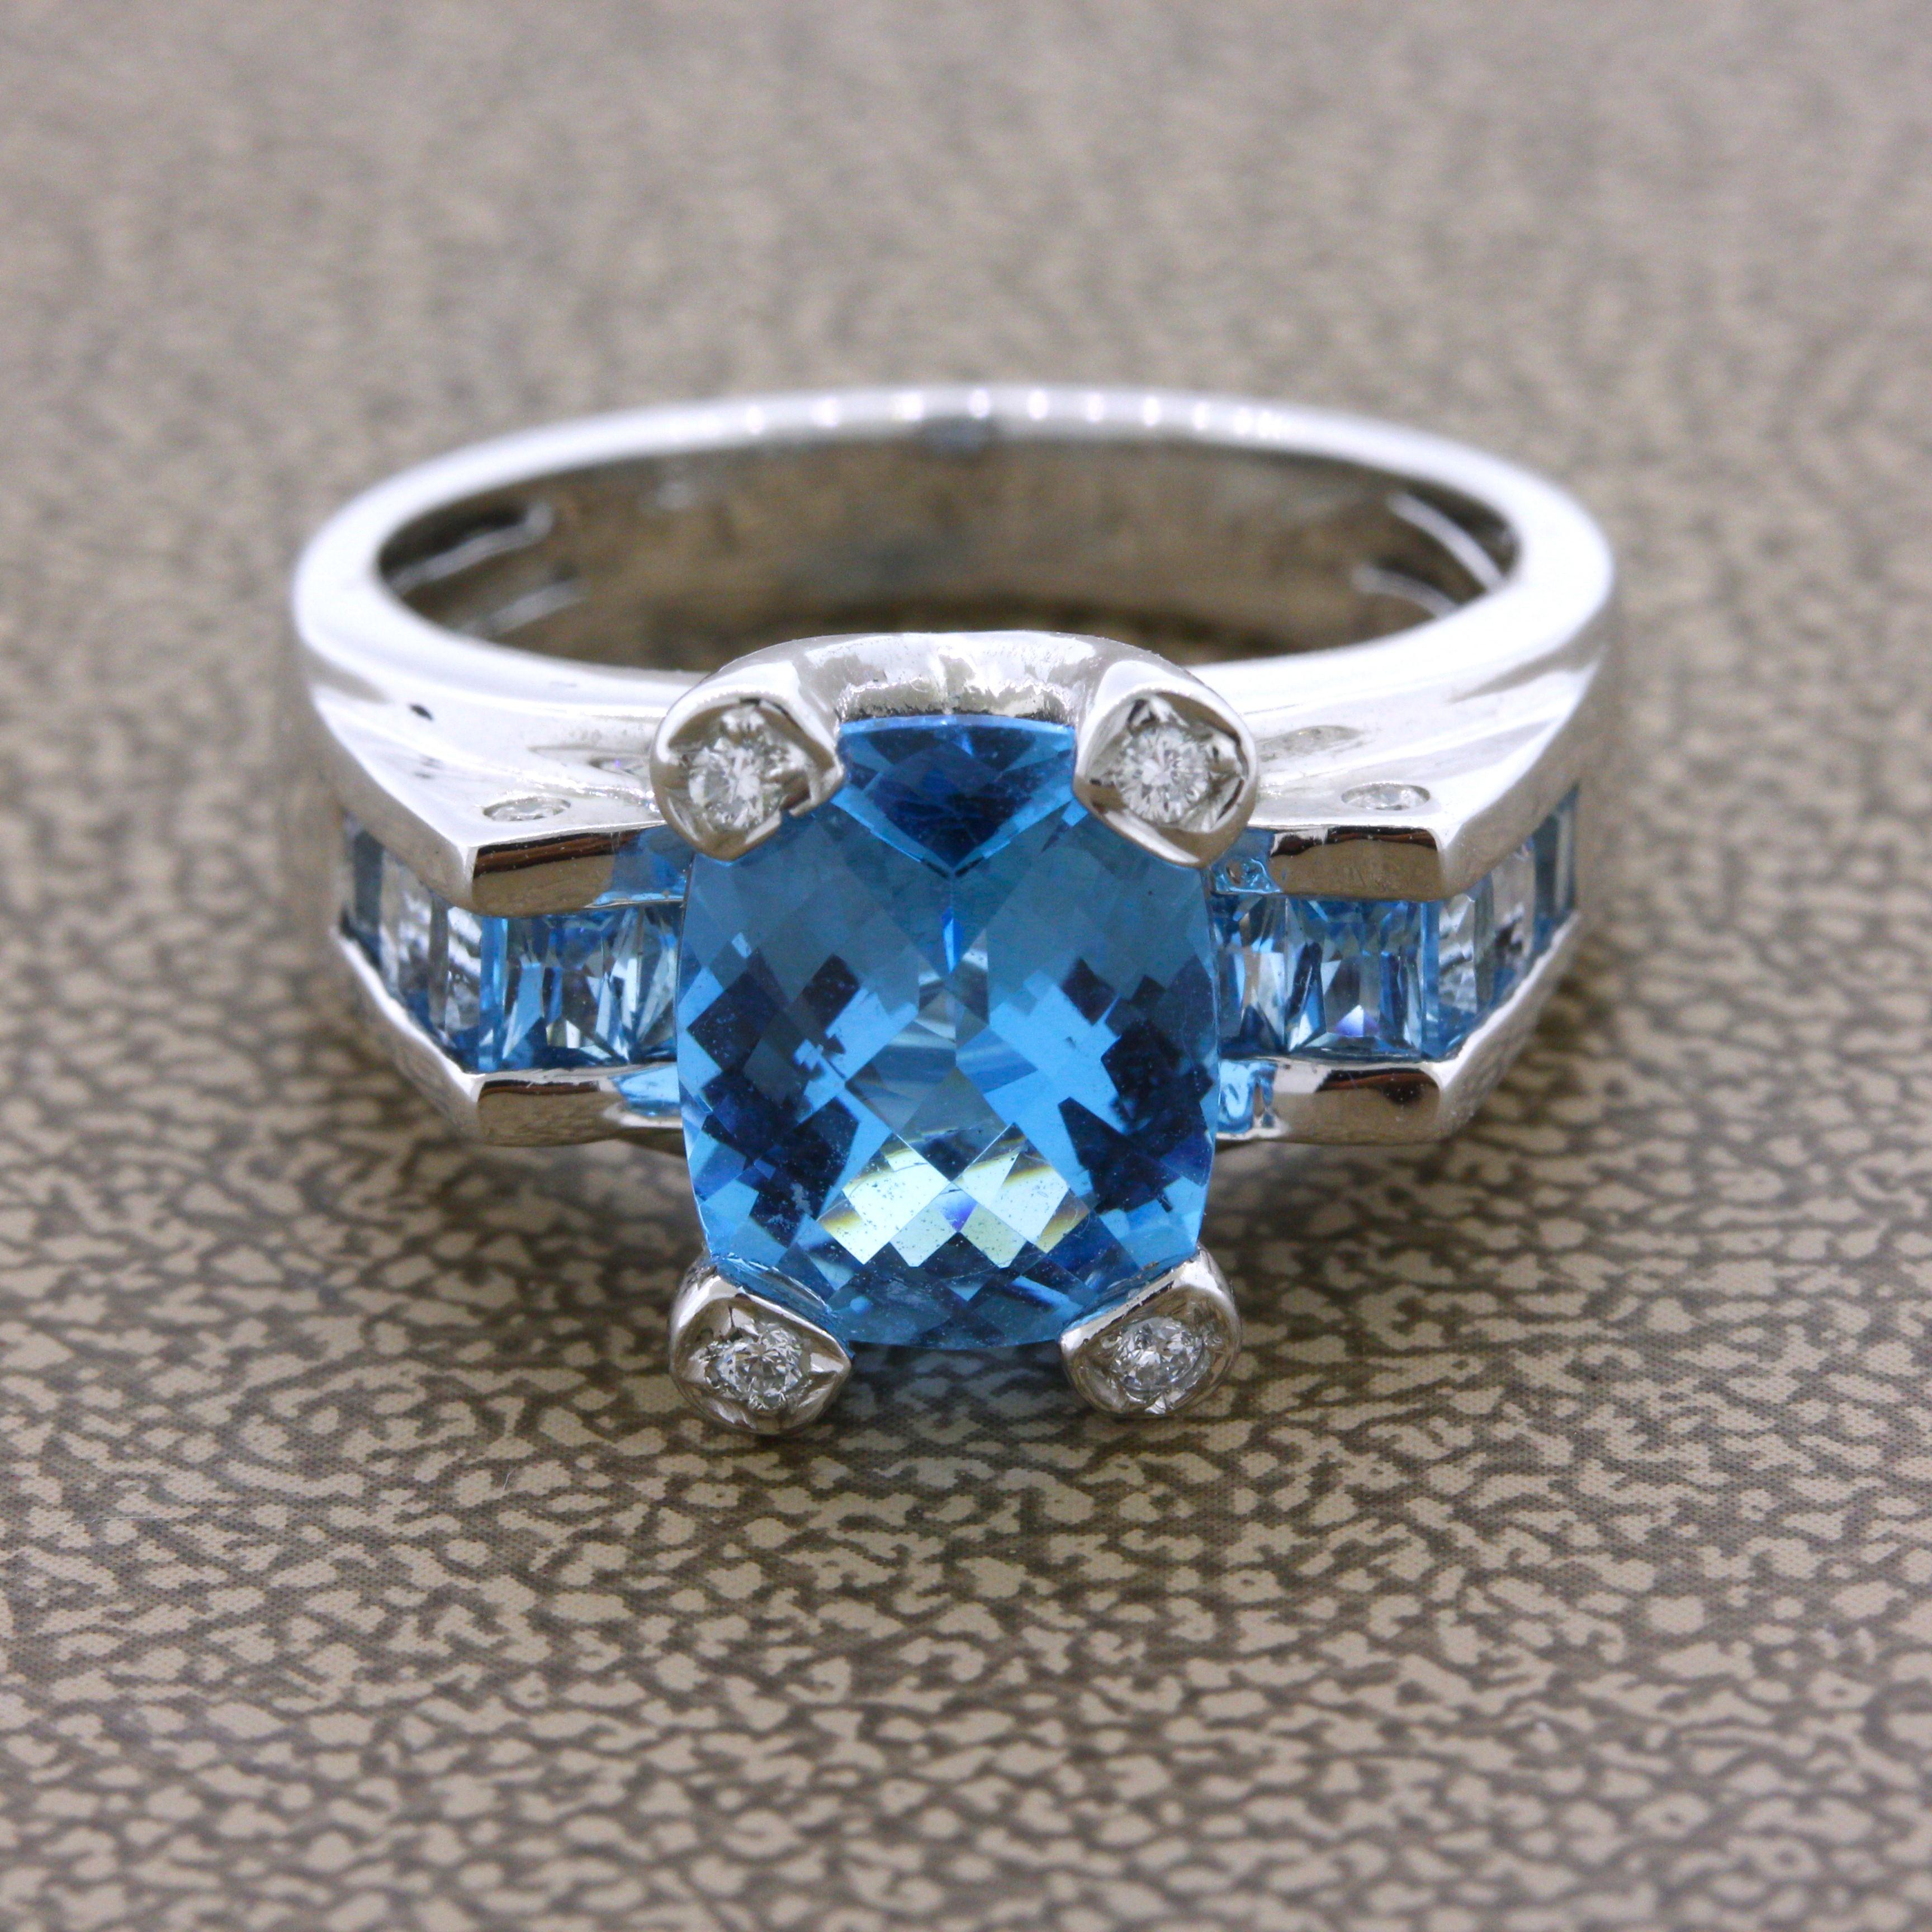 A lovely piece by designer Bellarri, featuring 4.65 carats of blue topaz and 0.07 carats of round diamonds adding brilliance and sparkle to the piece. The center topaz has a lovely rose-cut adding to the style of the ring. Made in 18k white gold and